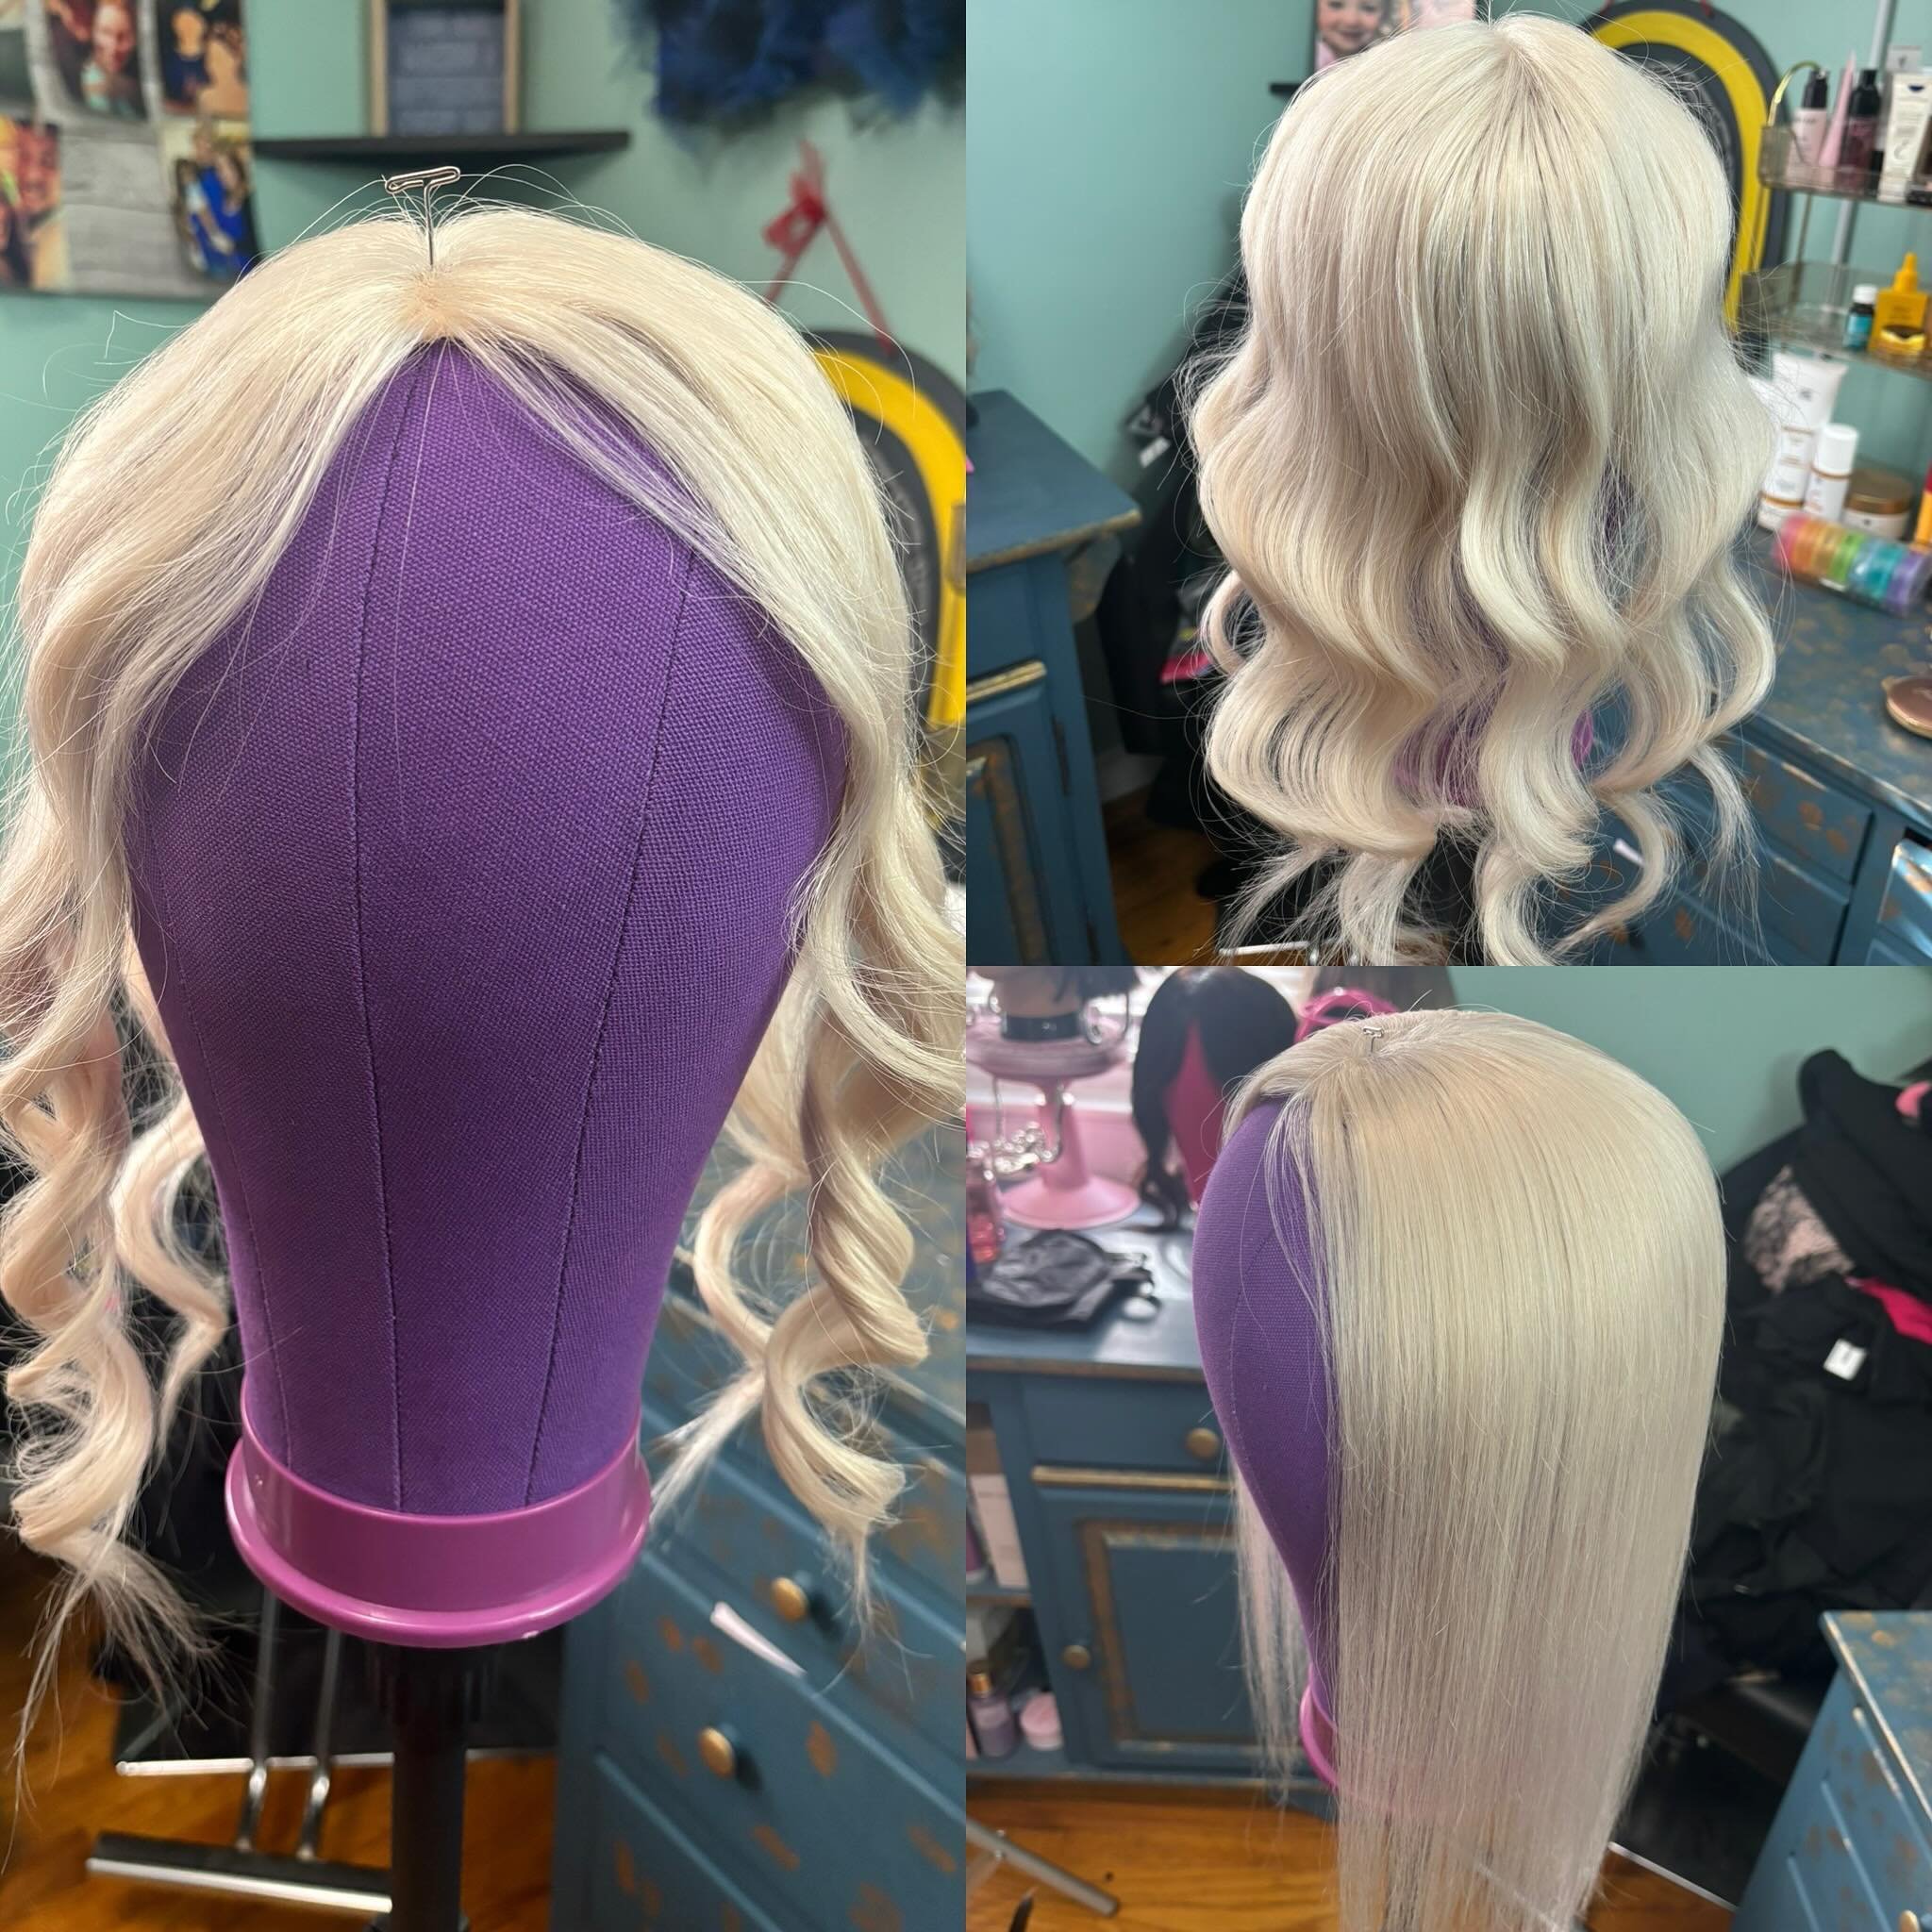 White blonde 3x5 mono base topper
18 inches European human hair 
Waved for photo 
$380 usd plus shipping 

Gorgeous gorgeous white blonde topper. 

Hairbyleash.com 

Custom orders accepted 

#hairtoppers#kingstonhairtoppers#customhairtoppers#locksbyl